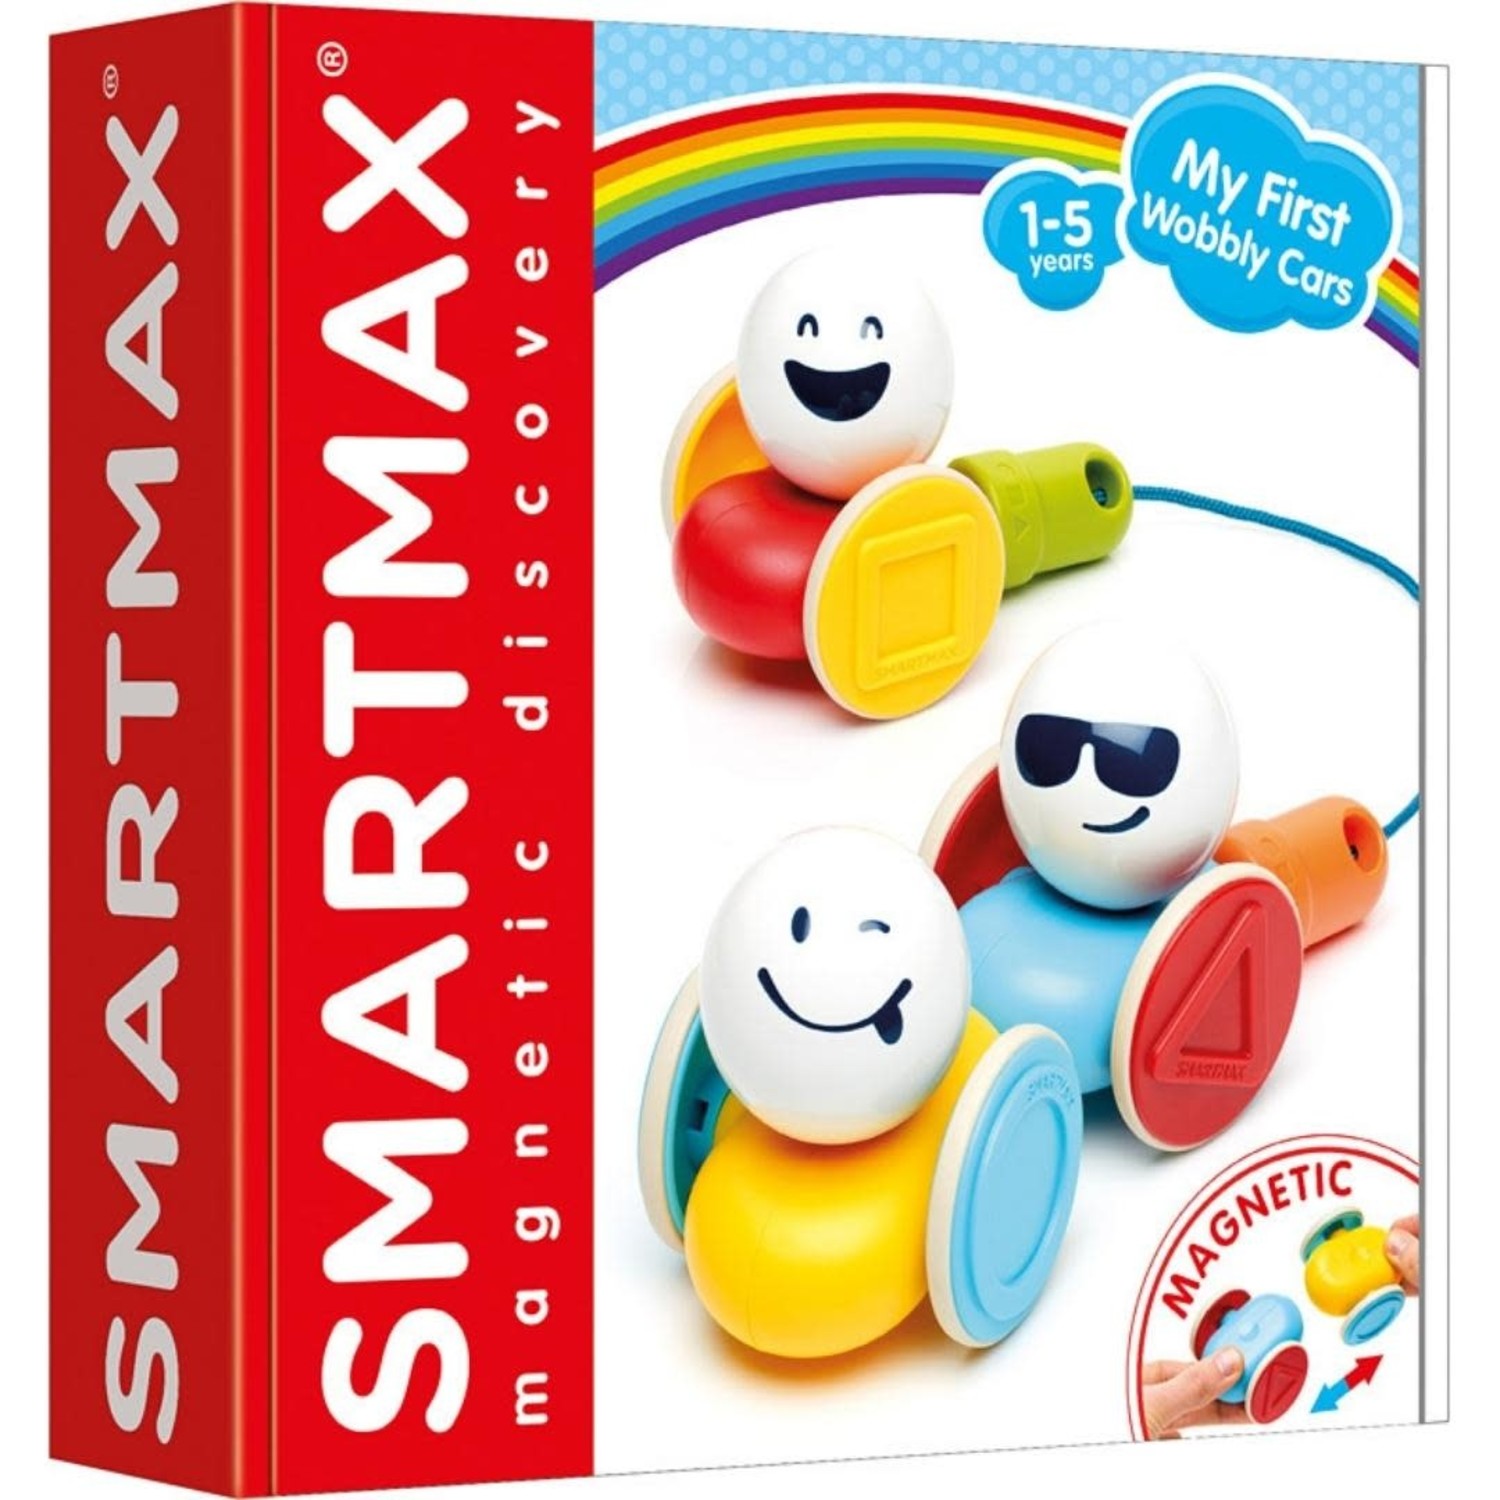 SmartMax Wobbly Cars - Mudpuddles Toys and Books